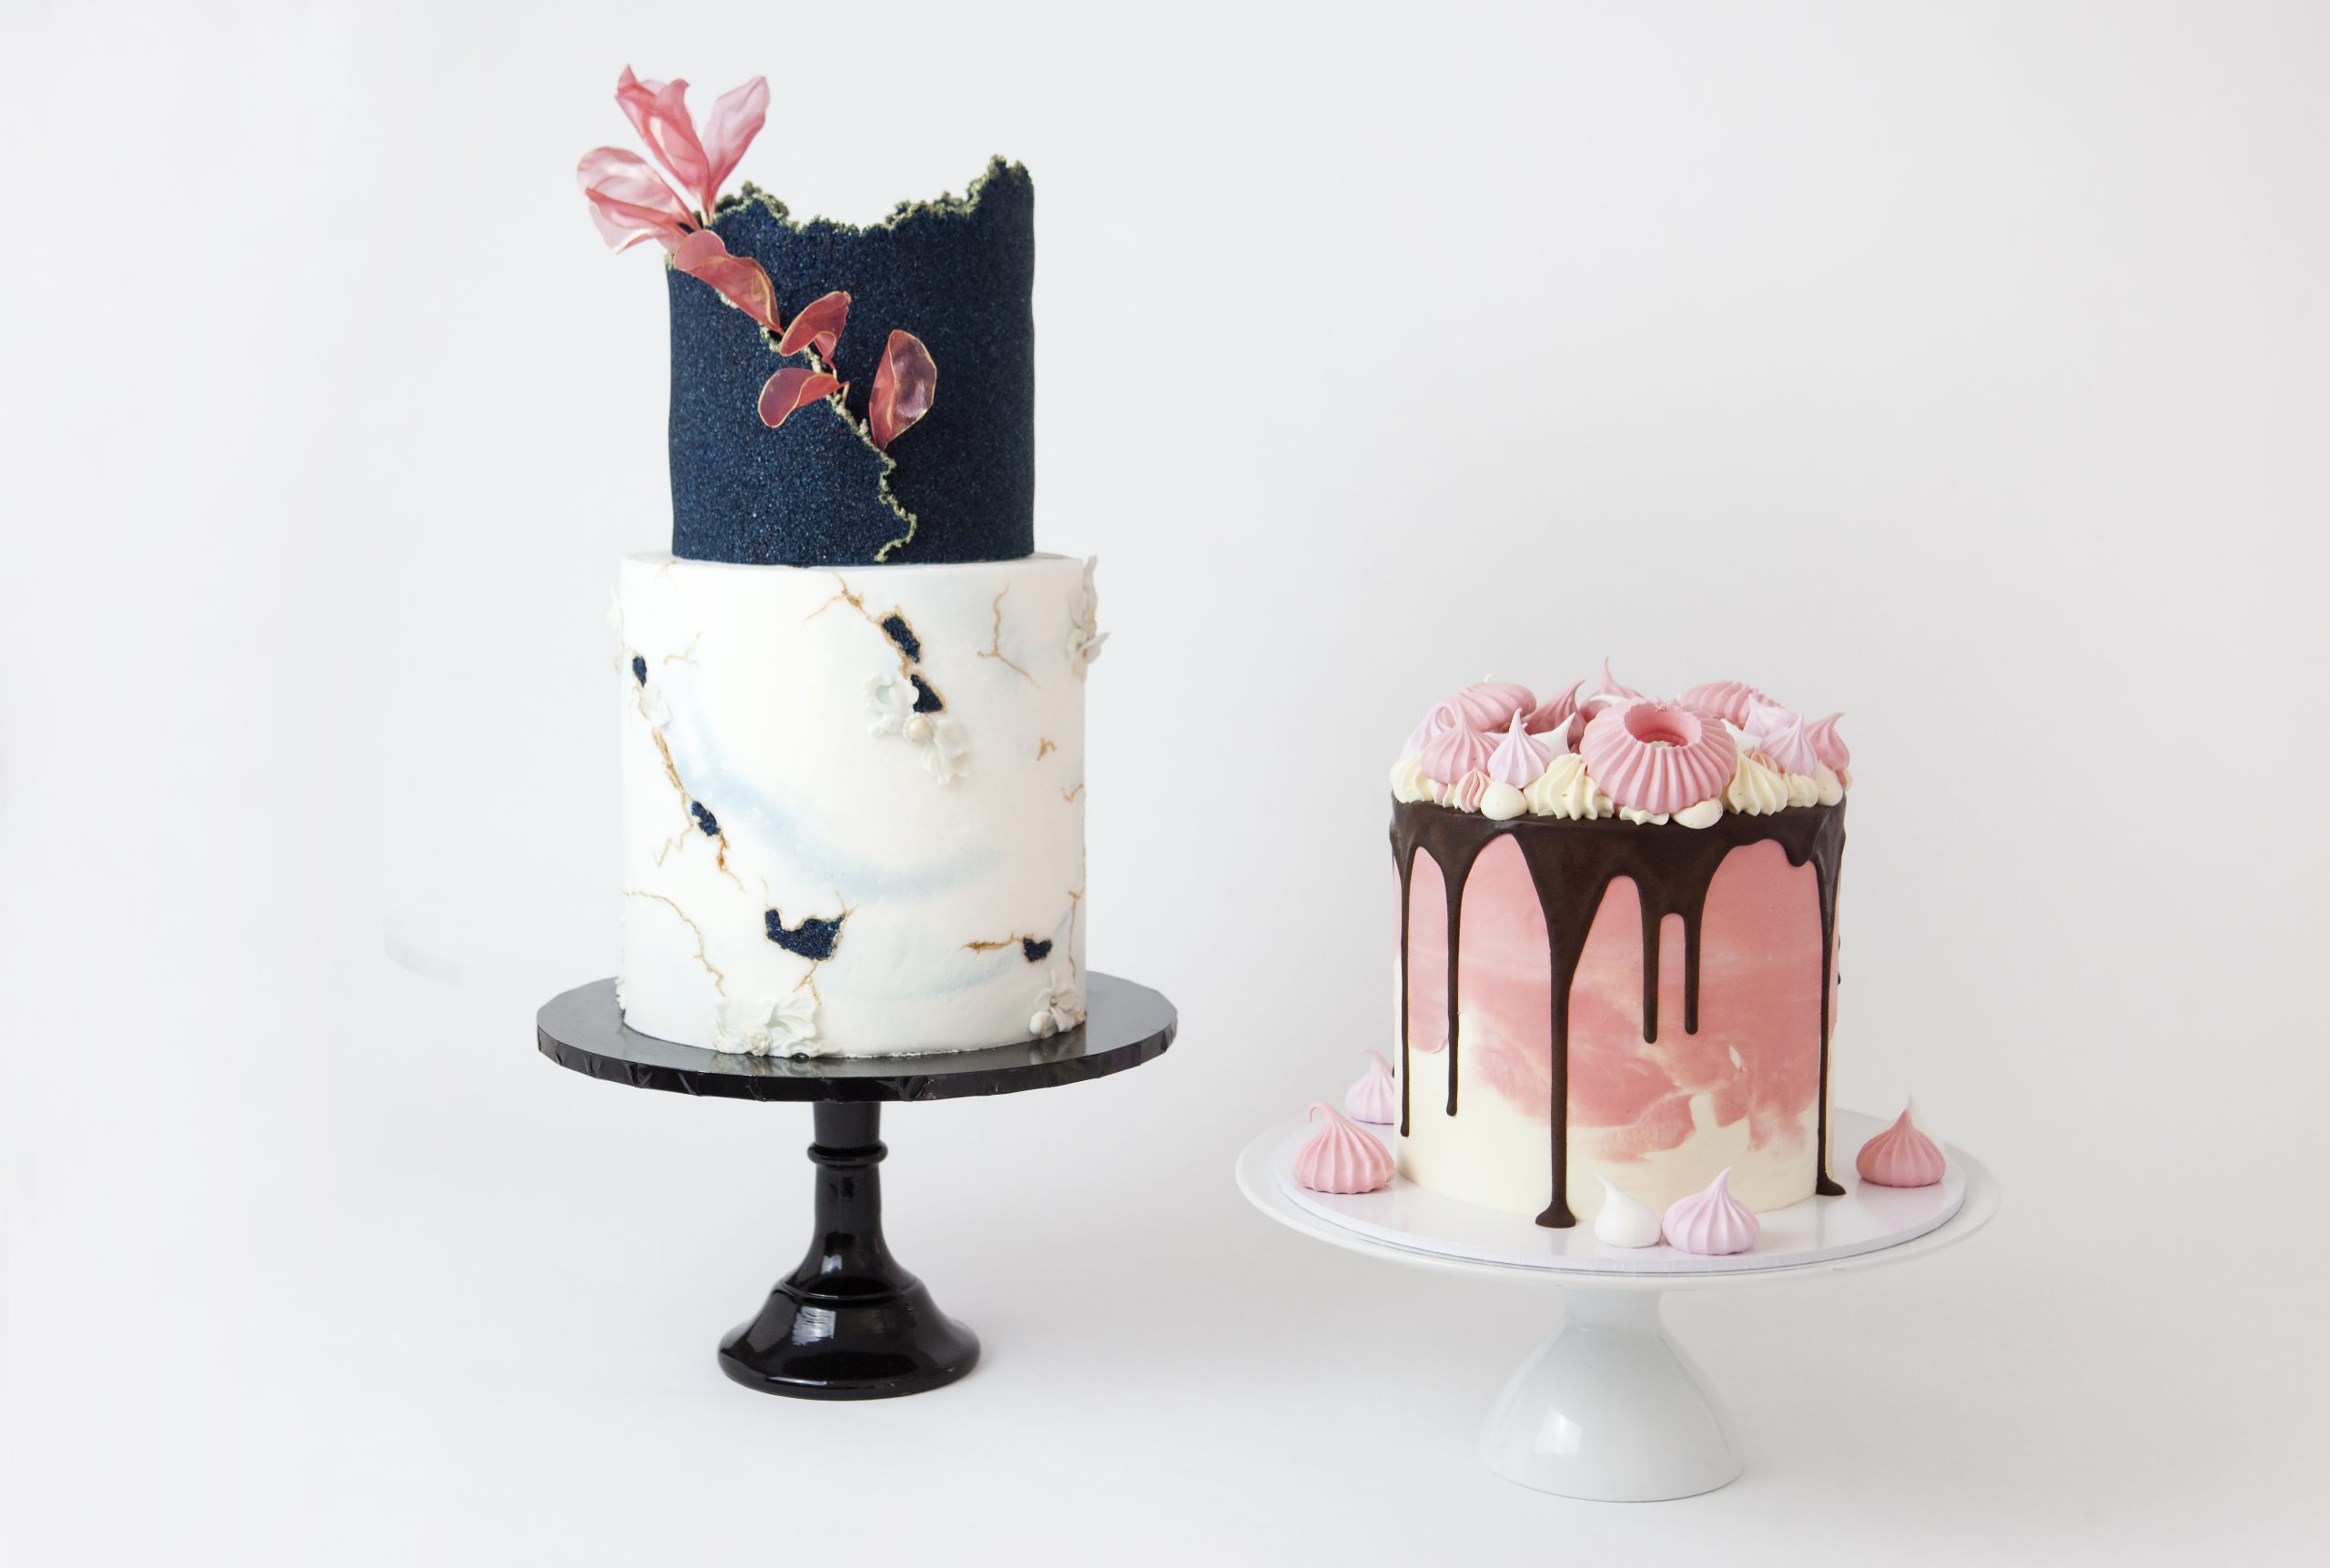 Vegan cake decorating and baking courses from Fair Cake